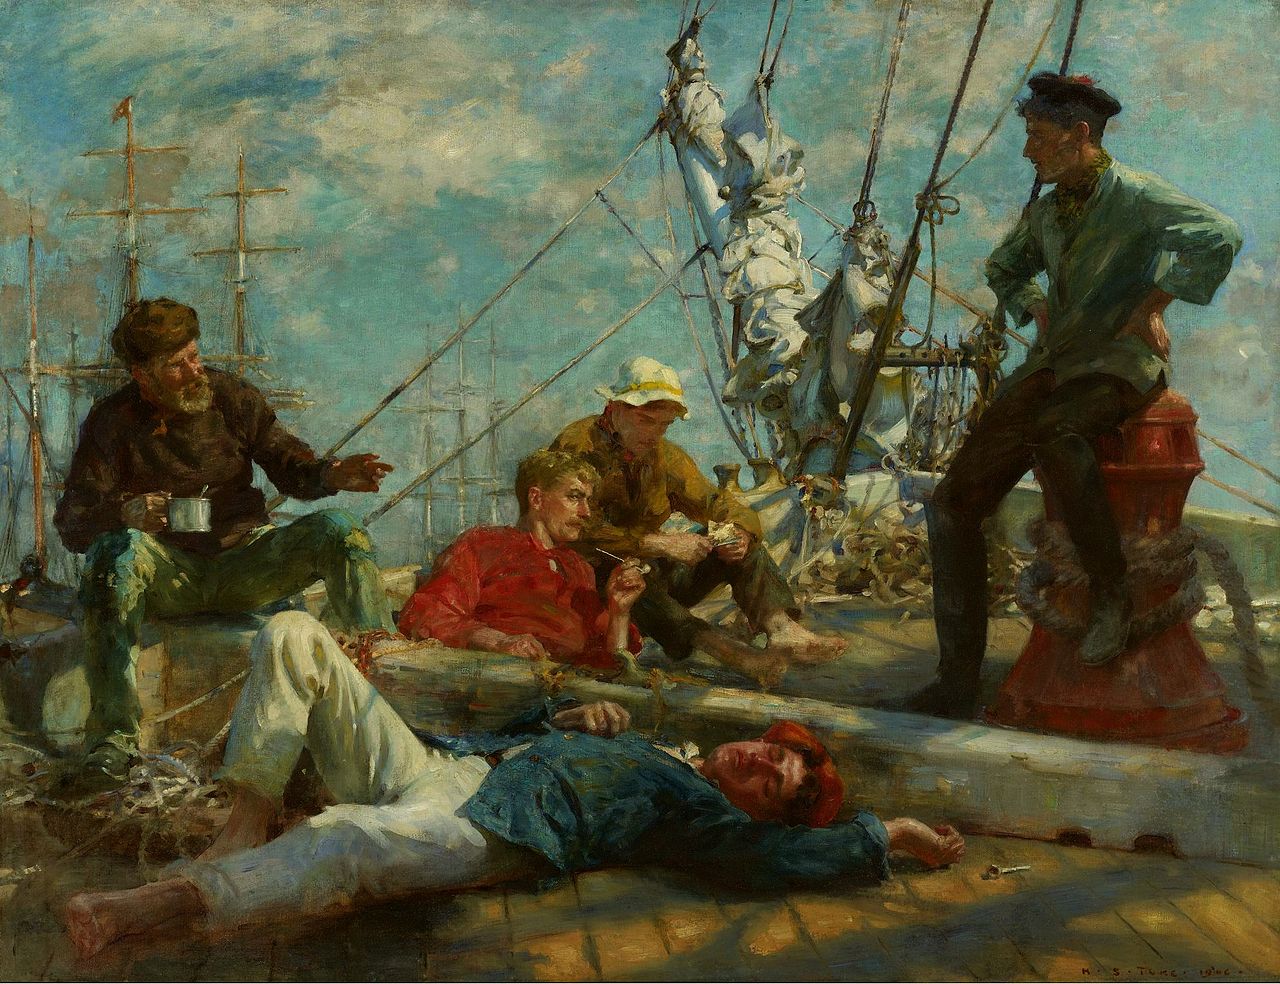 The Midday Rest Sailors Yarning, by Henry Scott Tuke, Public Domain https://commons.wikimedia.org/w/index.php?curid=16463835